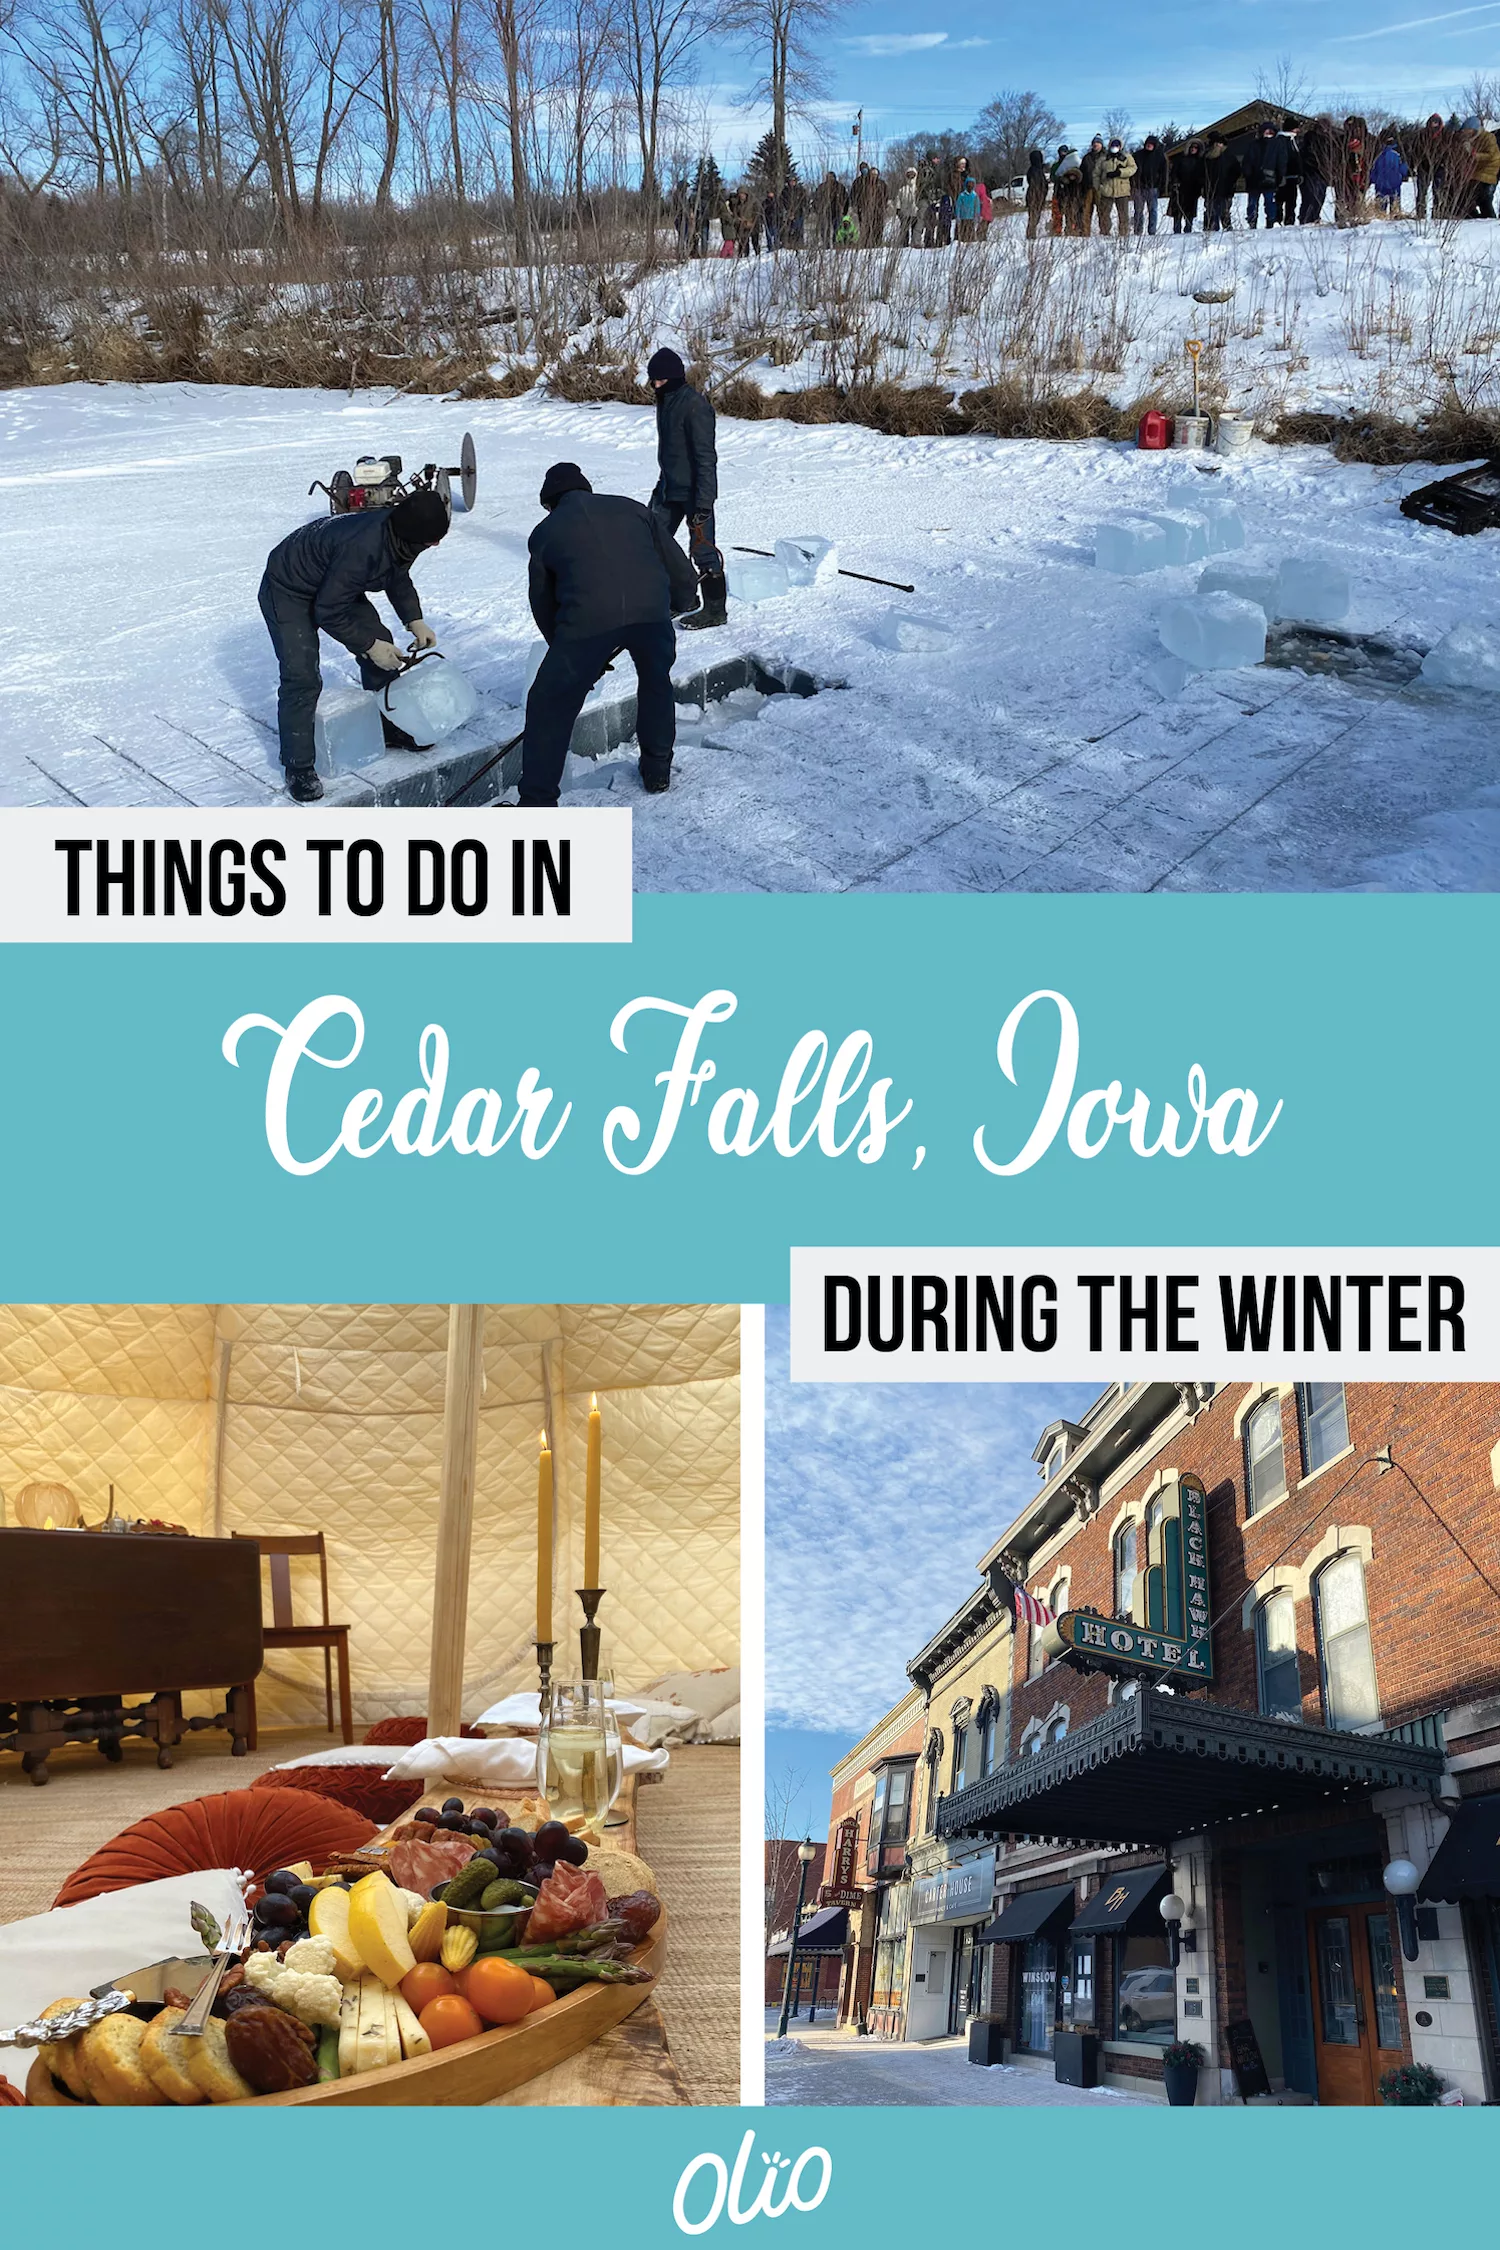 Planning a Midwest winter getaway? Look no further than Cedar Falls, Iowa! From unique local festivals to delicious dining experiences to historic hotels, there's something for everyone in this Iowa community. Embrace the winter with ice harvesting and snow shoeing then warm up with a cozy winter picnic, craft beer flights and more. #Iowa #Midwest #WinterGetaway #CedarFalls